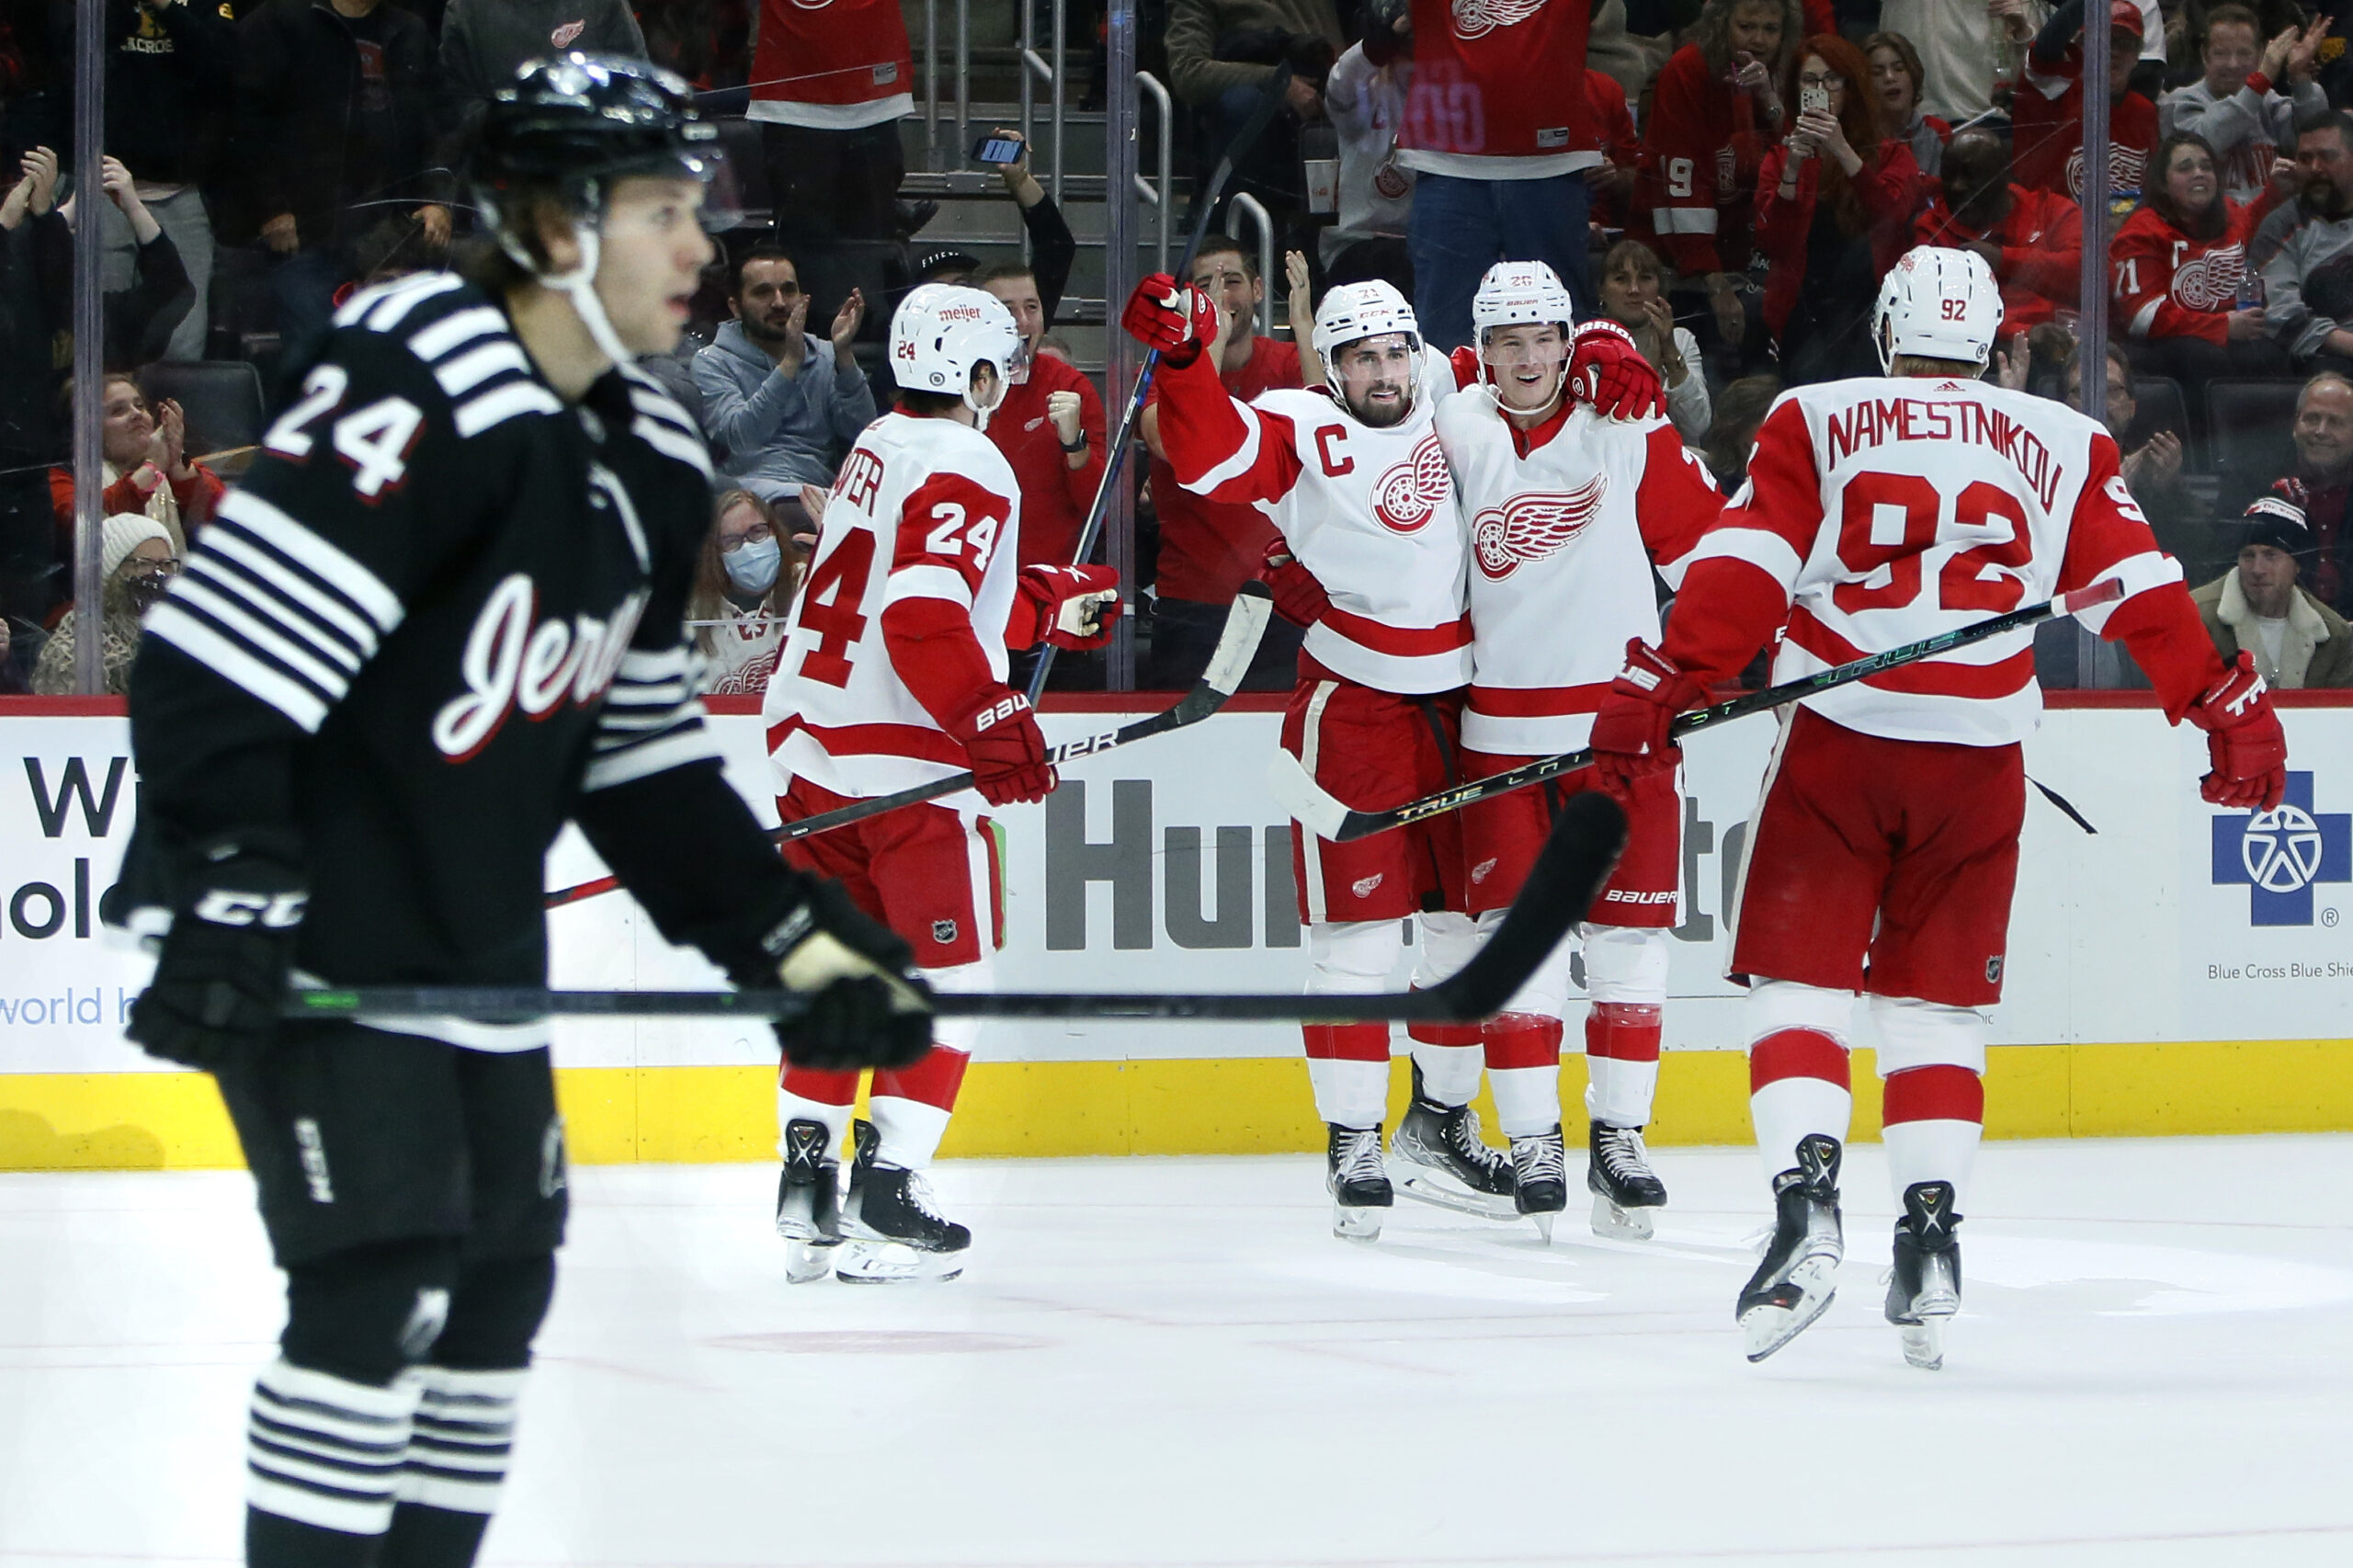 Detroit Red Wings center Dylan Larkin, third from left, celebrates his second goal of the game with center Pius Suter (24), defenseman Gustav Lindstrom and center Vladislav Namestnikov (92) as New Jersey Devils defenseman Ty Smith (24) skates off during the second period of an NHL hockey game Saturday, Dec. 18, 2021, in Detroit. (AP Photo/Duane Burleson)